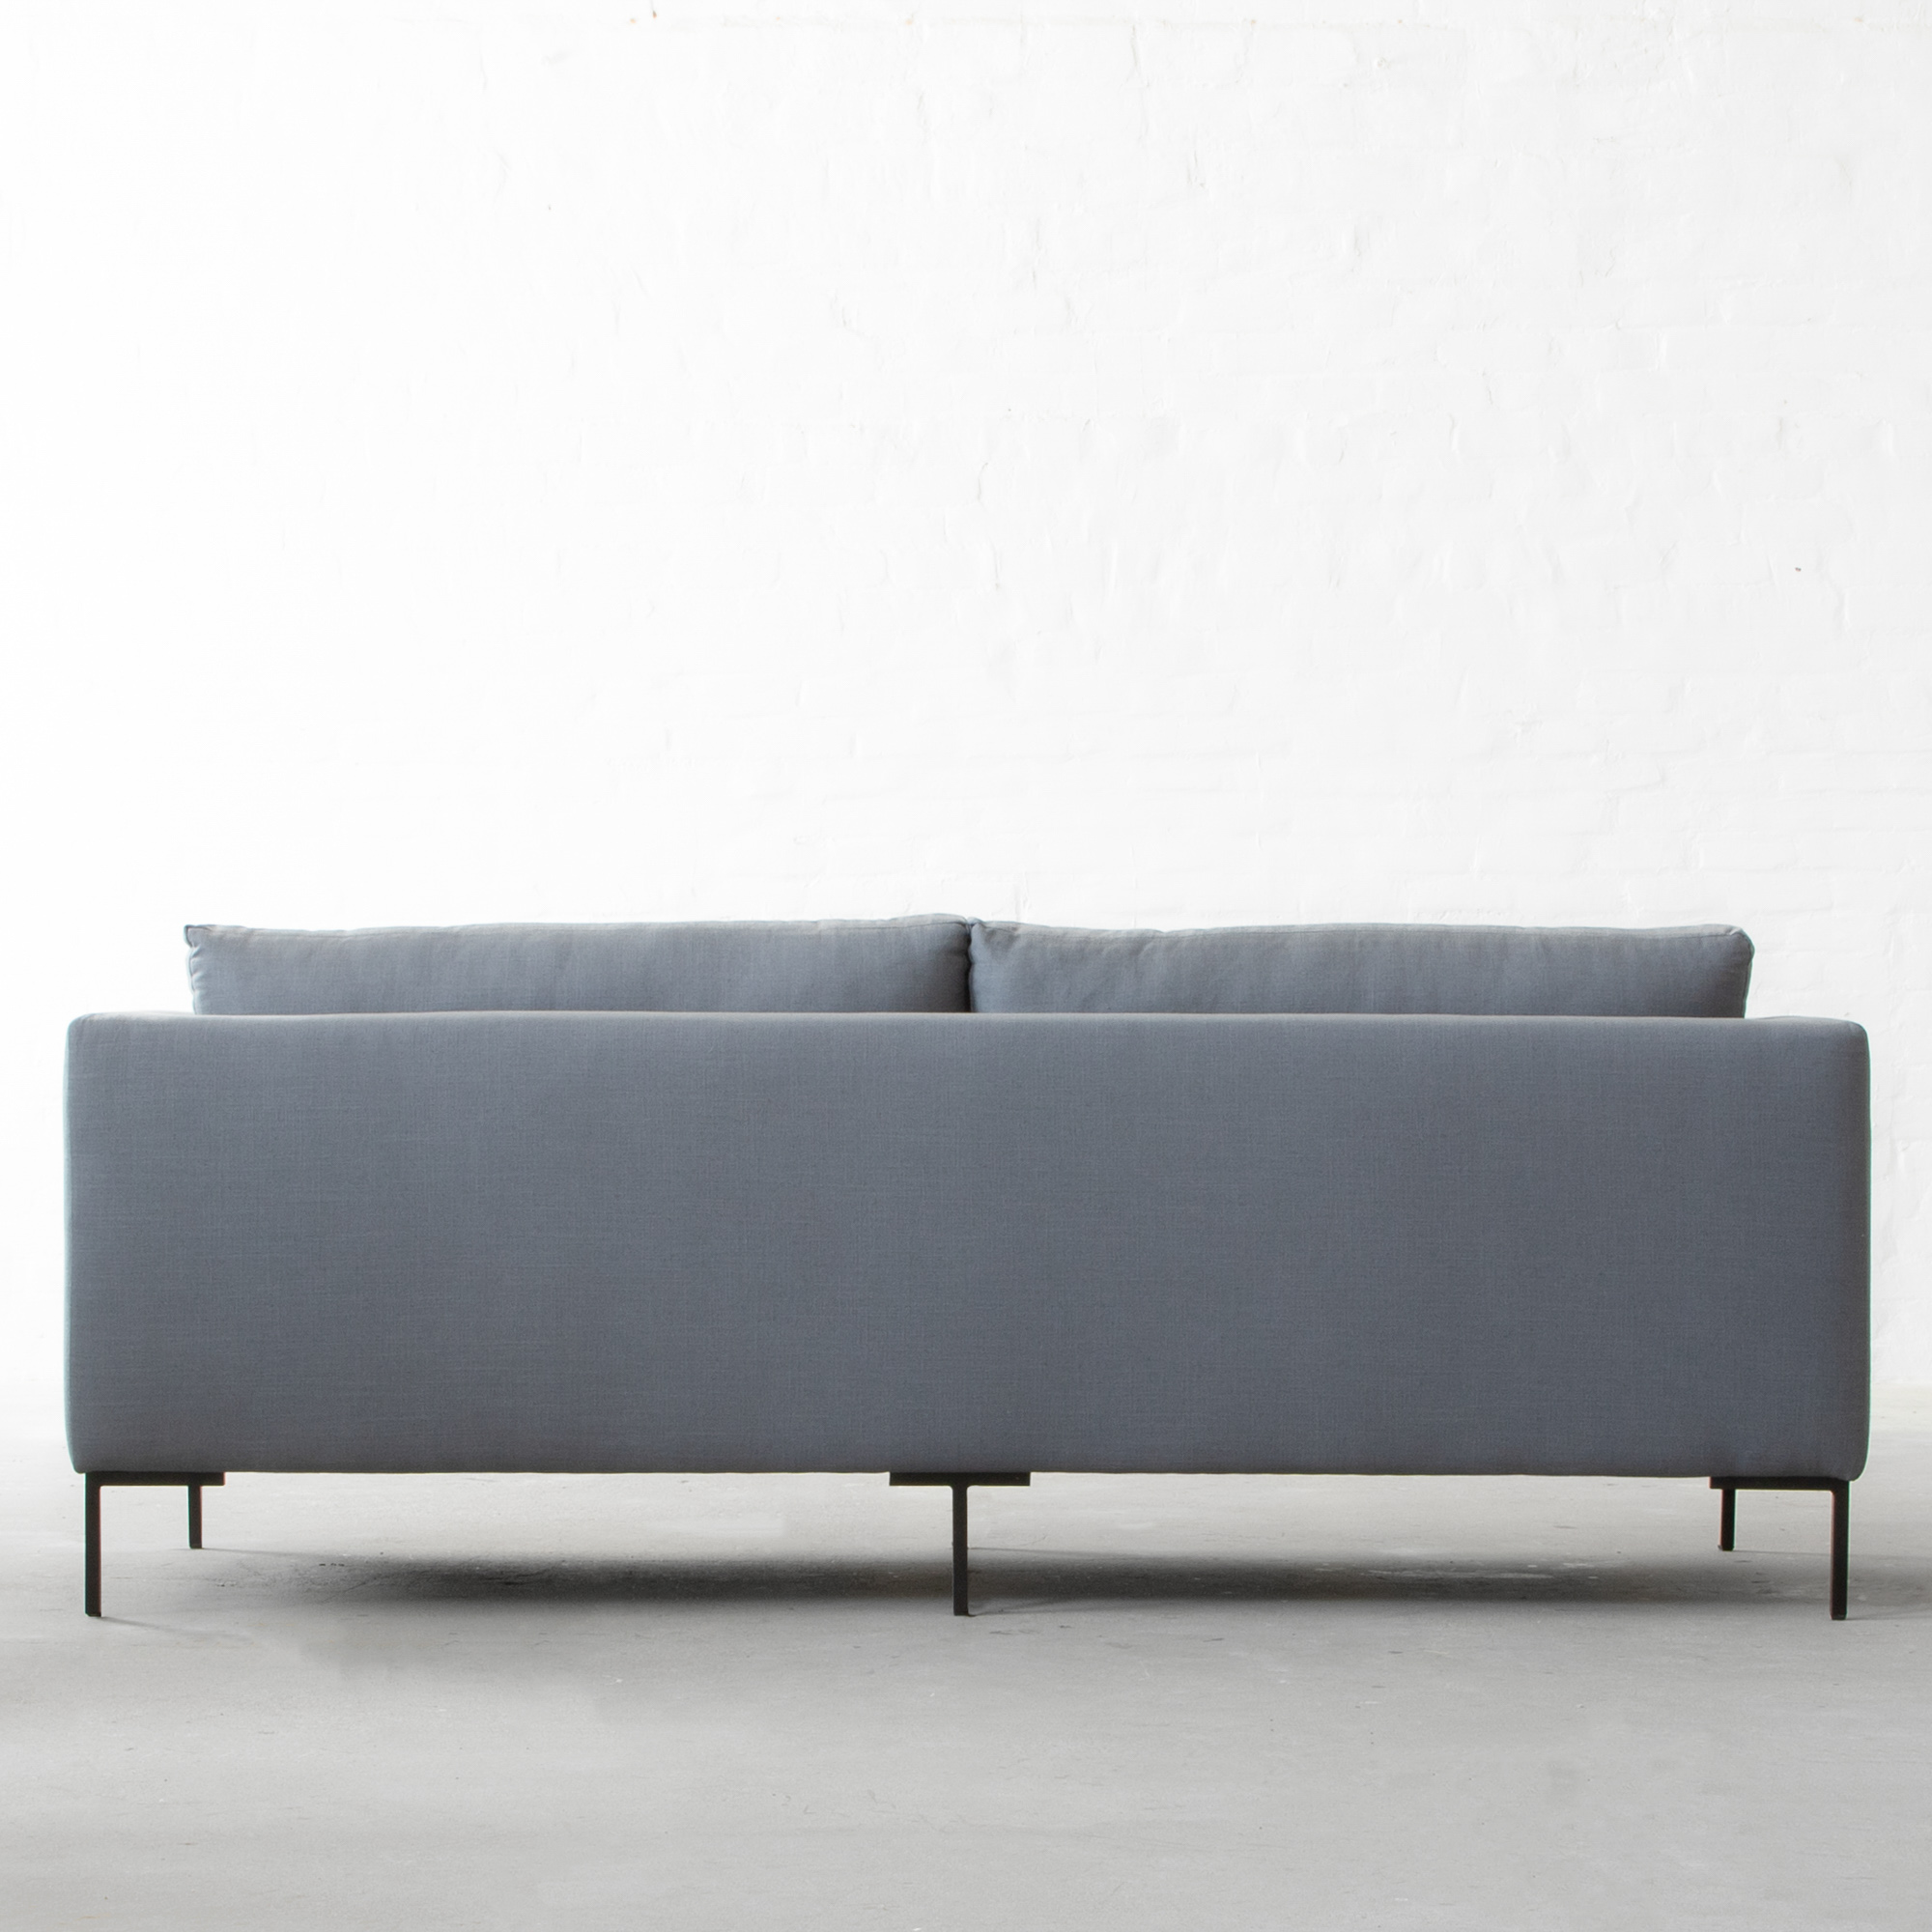 L.A. Sofa Collection